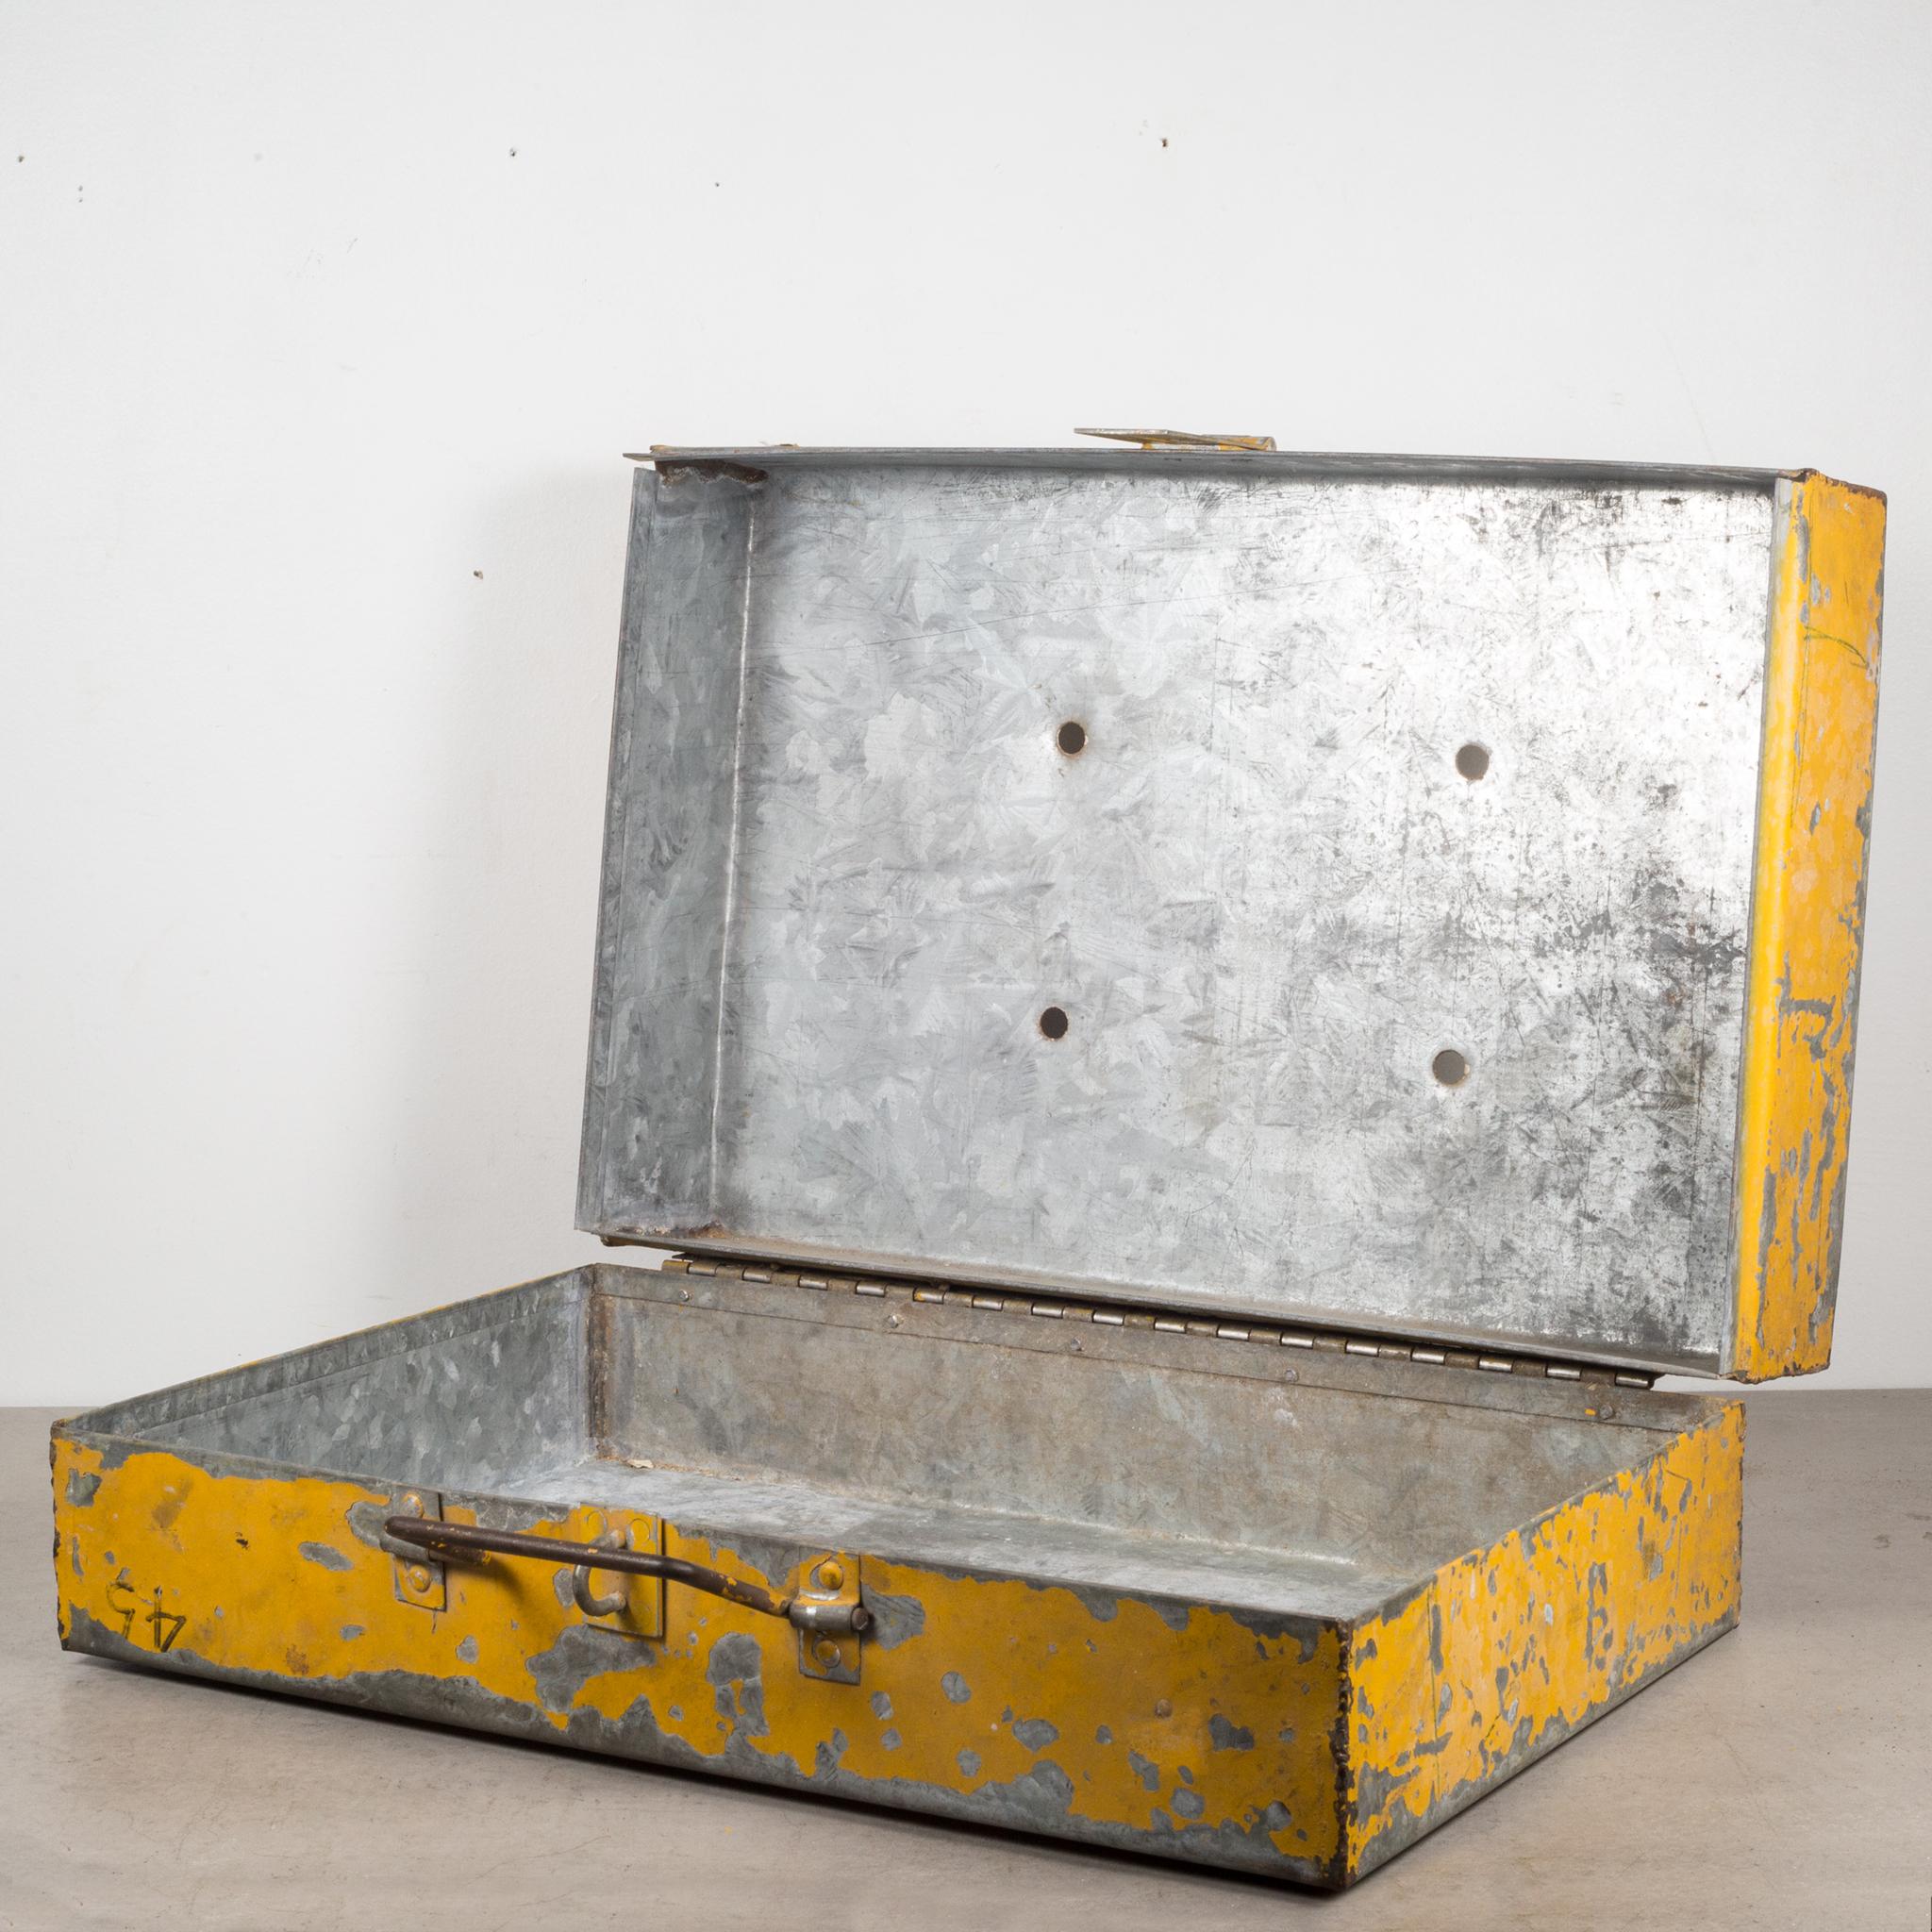 About

A distressed metal toolbox with metal handle and latch.

Creator unknown.
Date of manufacture circa 1940-1950.
Materials and techniques paint and metal.
Condition good. Wear consistent with age and use.
Dimensions: H 6.5 W 18.75 in. D